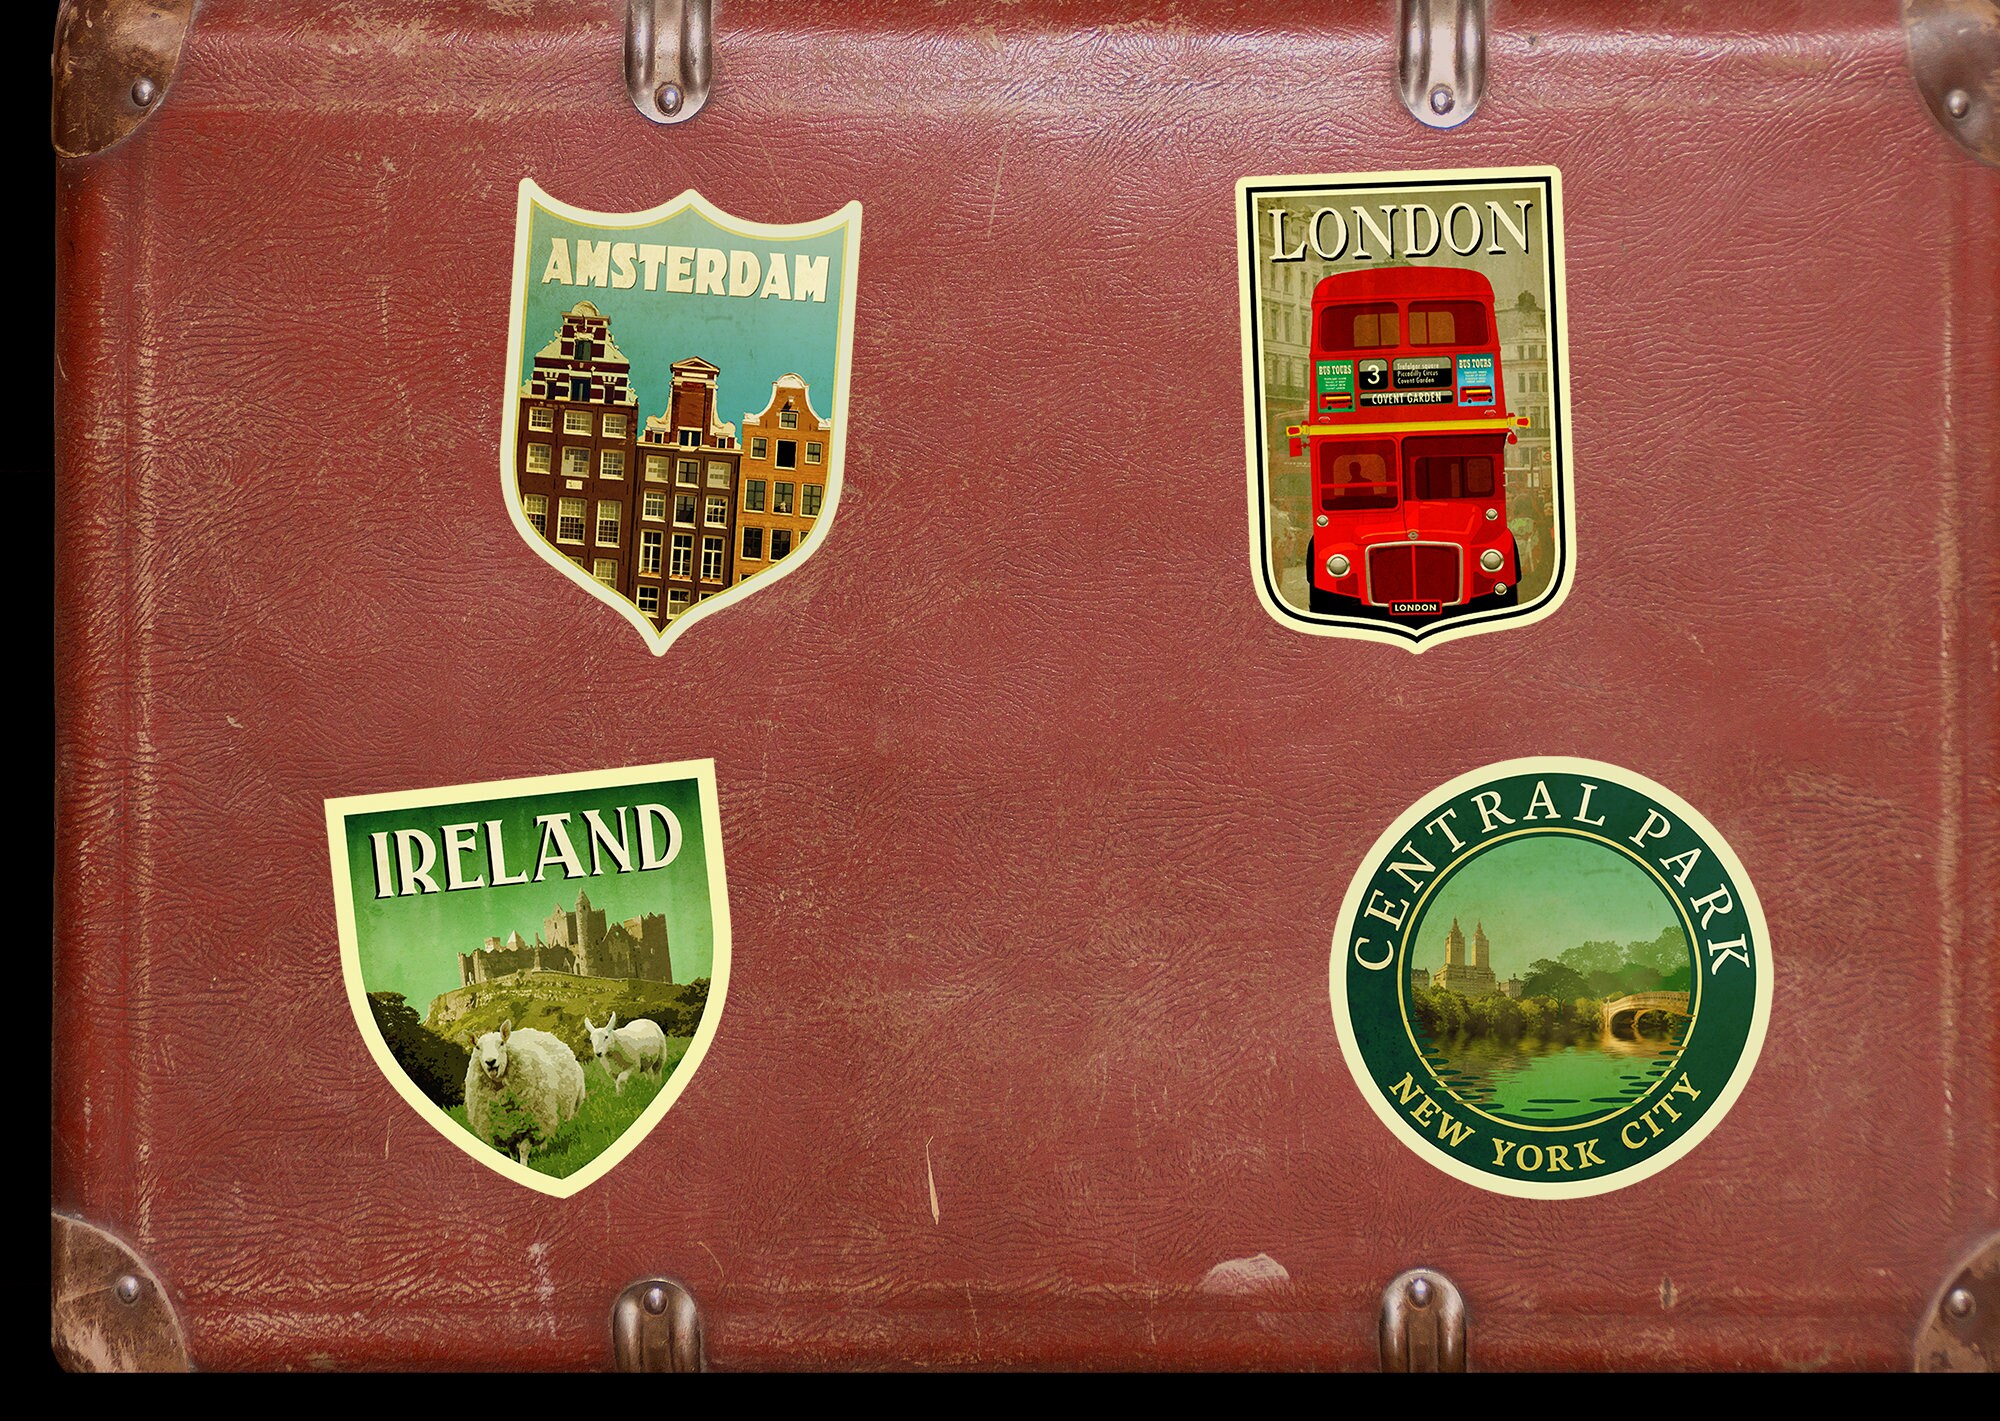 Travel Stickers Pack, Retro Luggage Labels, Vintage Style Decals for  Suitcase, Laptop or Water Bottle, Choose Your Cities 